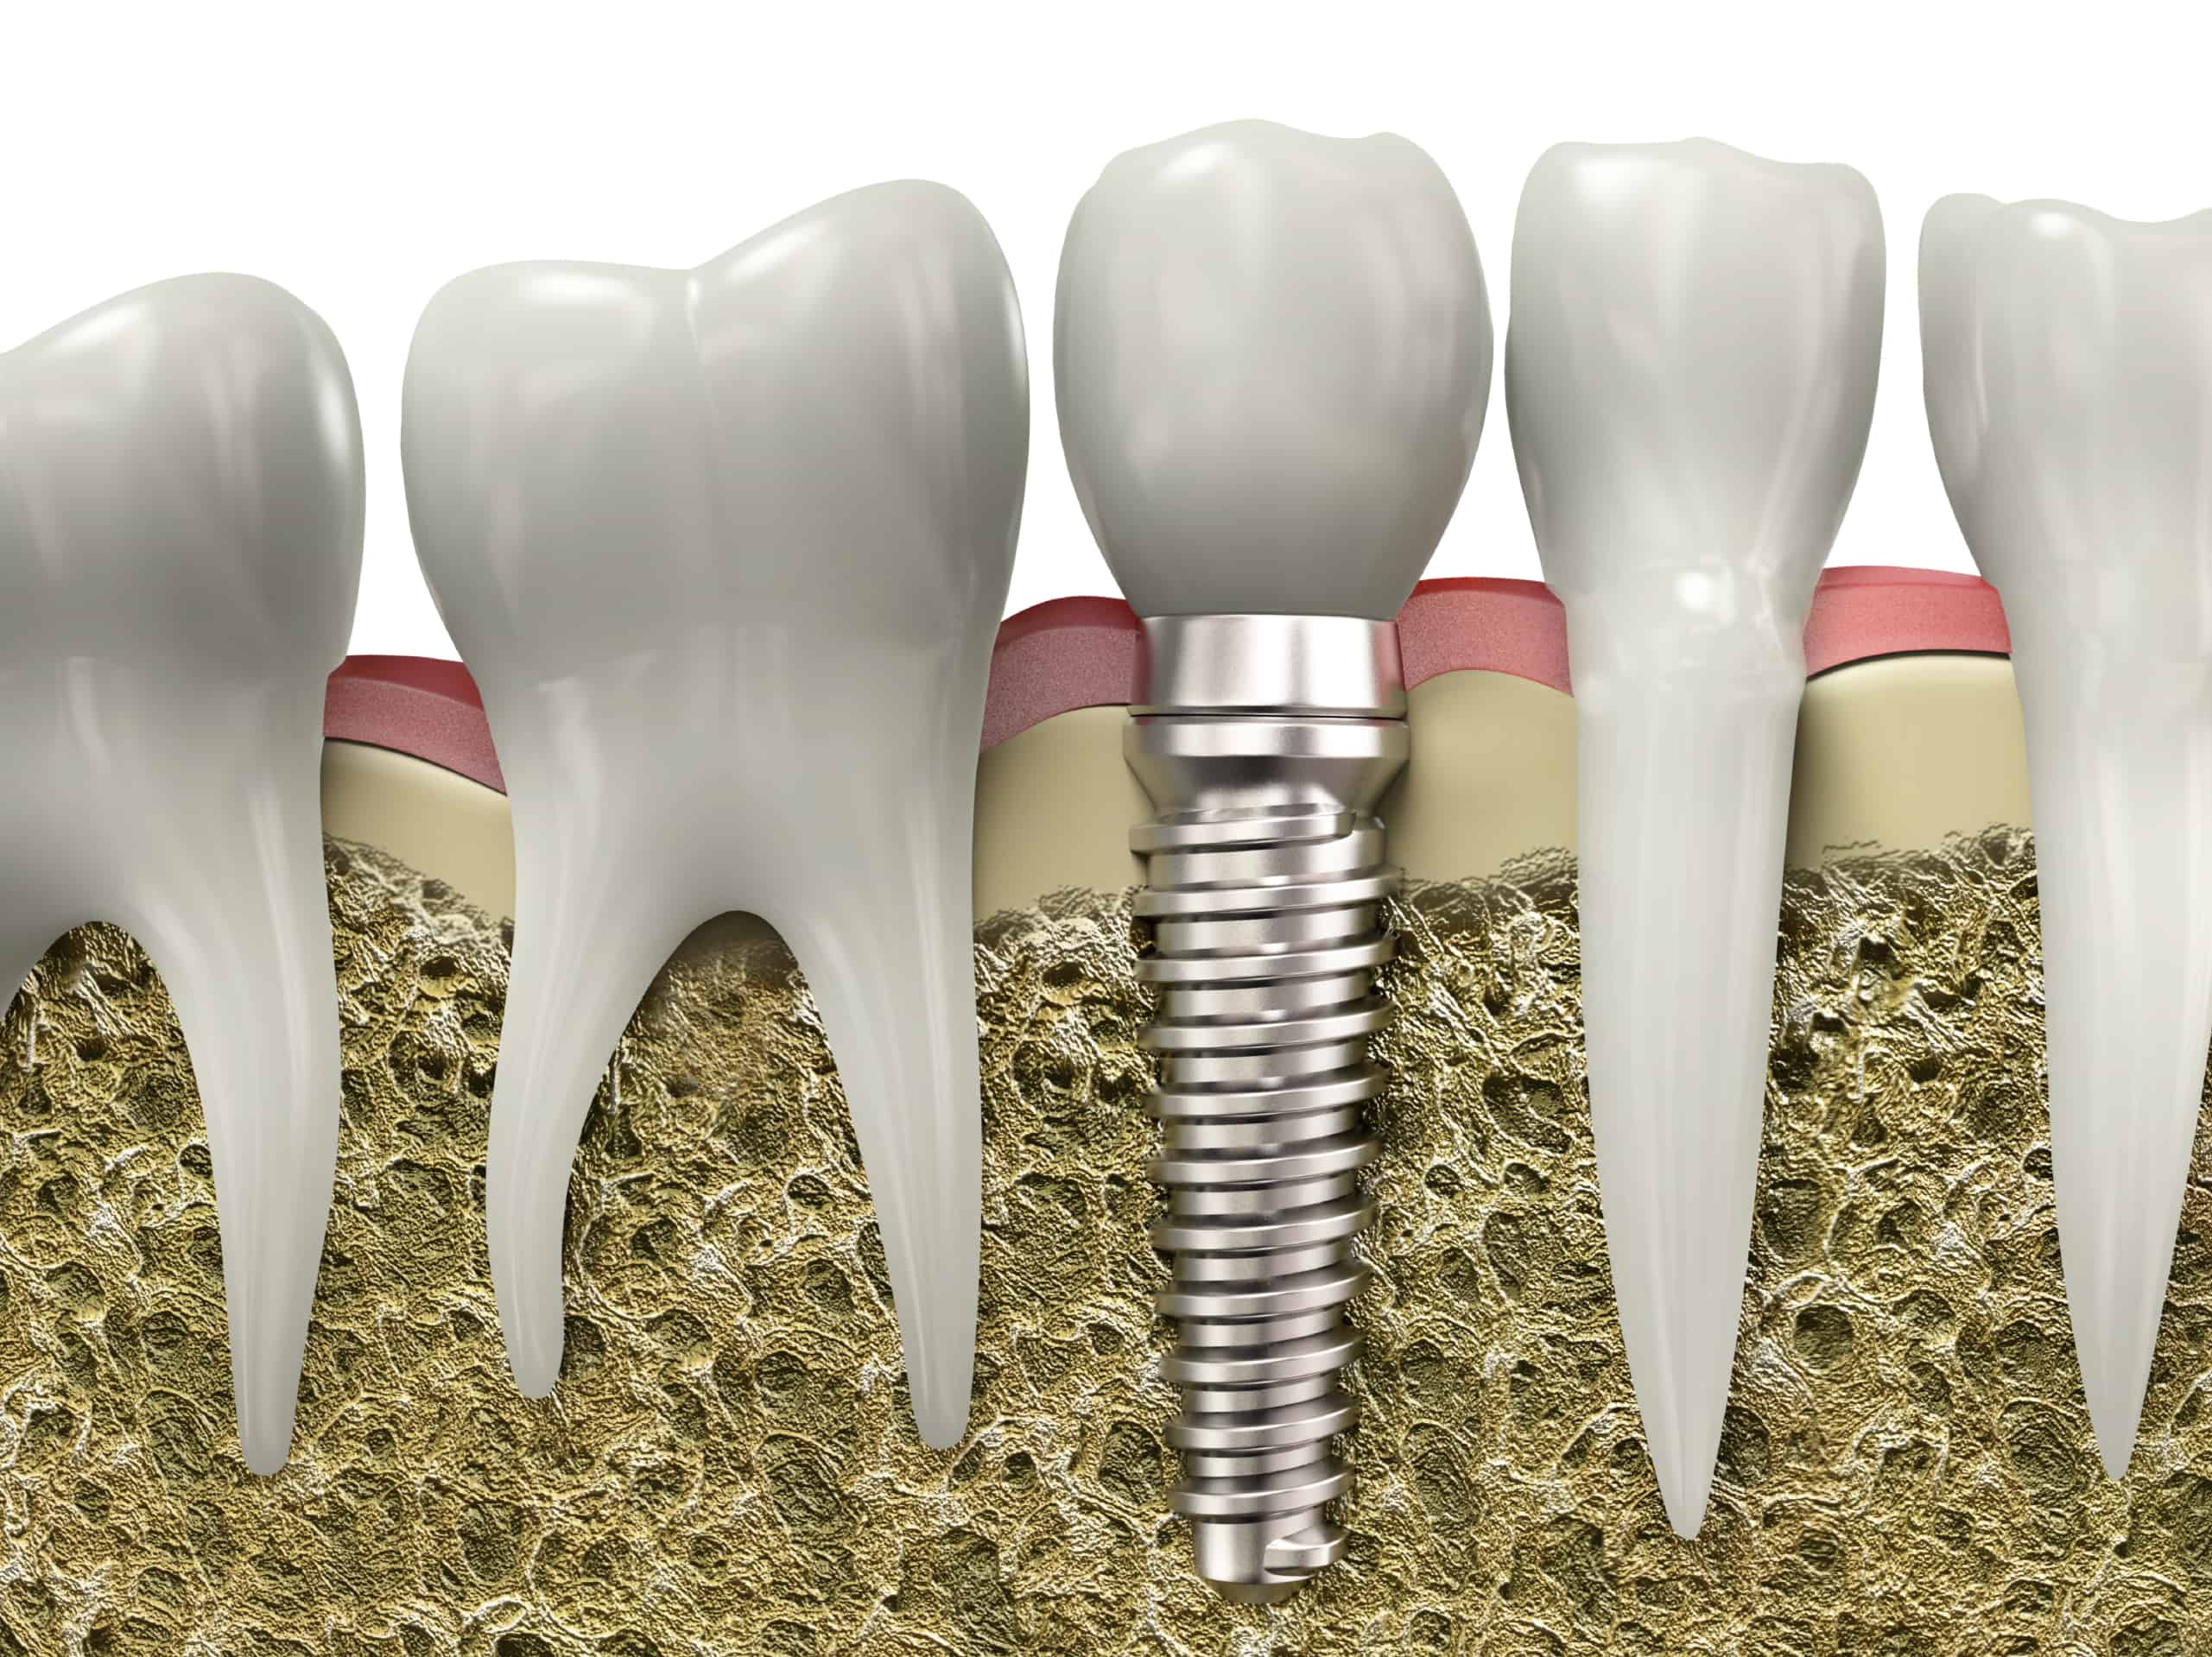 Implant Dentistry | Five Must-Ask Questions for An Implant Dentist